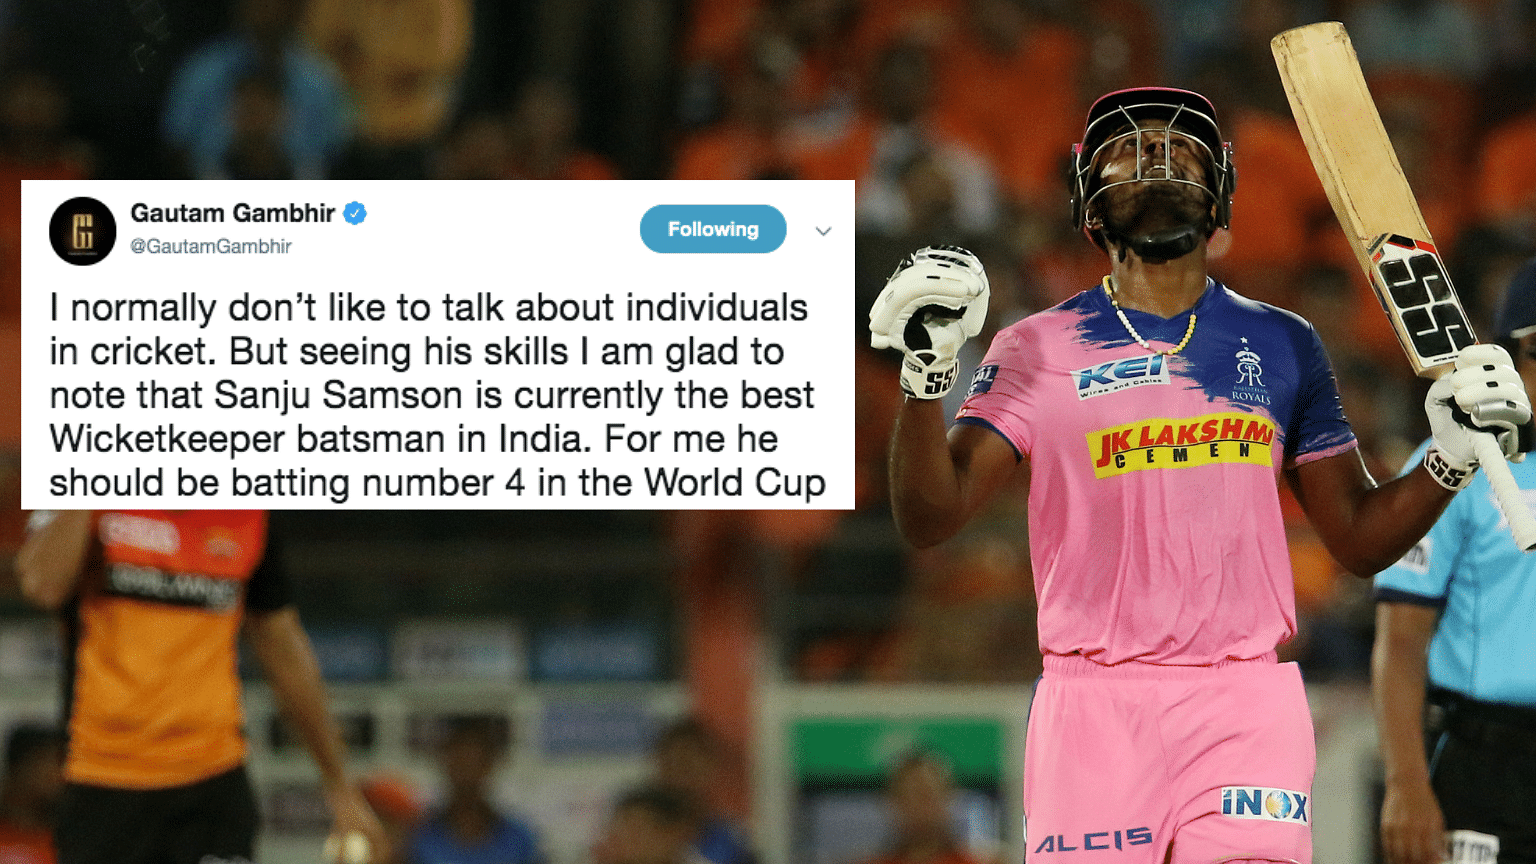 Samson scored his second IPL ton, his first for Rajasthan Royals.&nbsp;